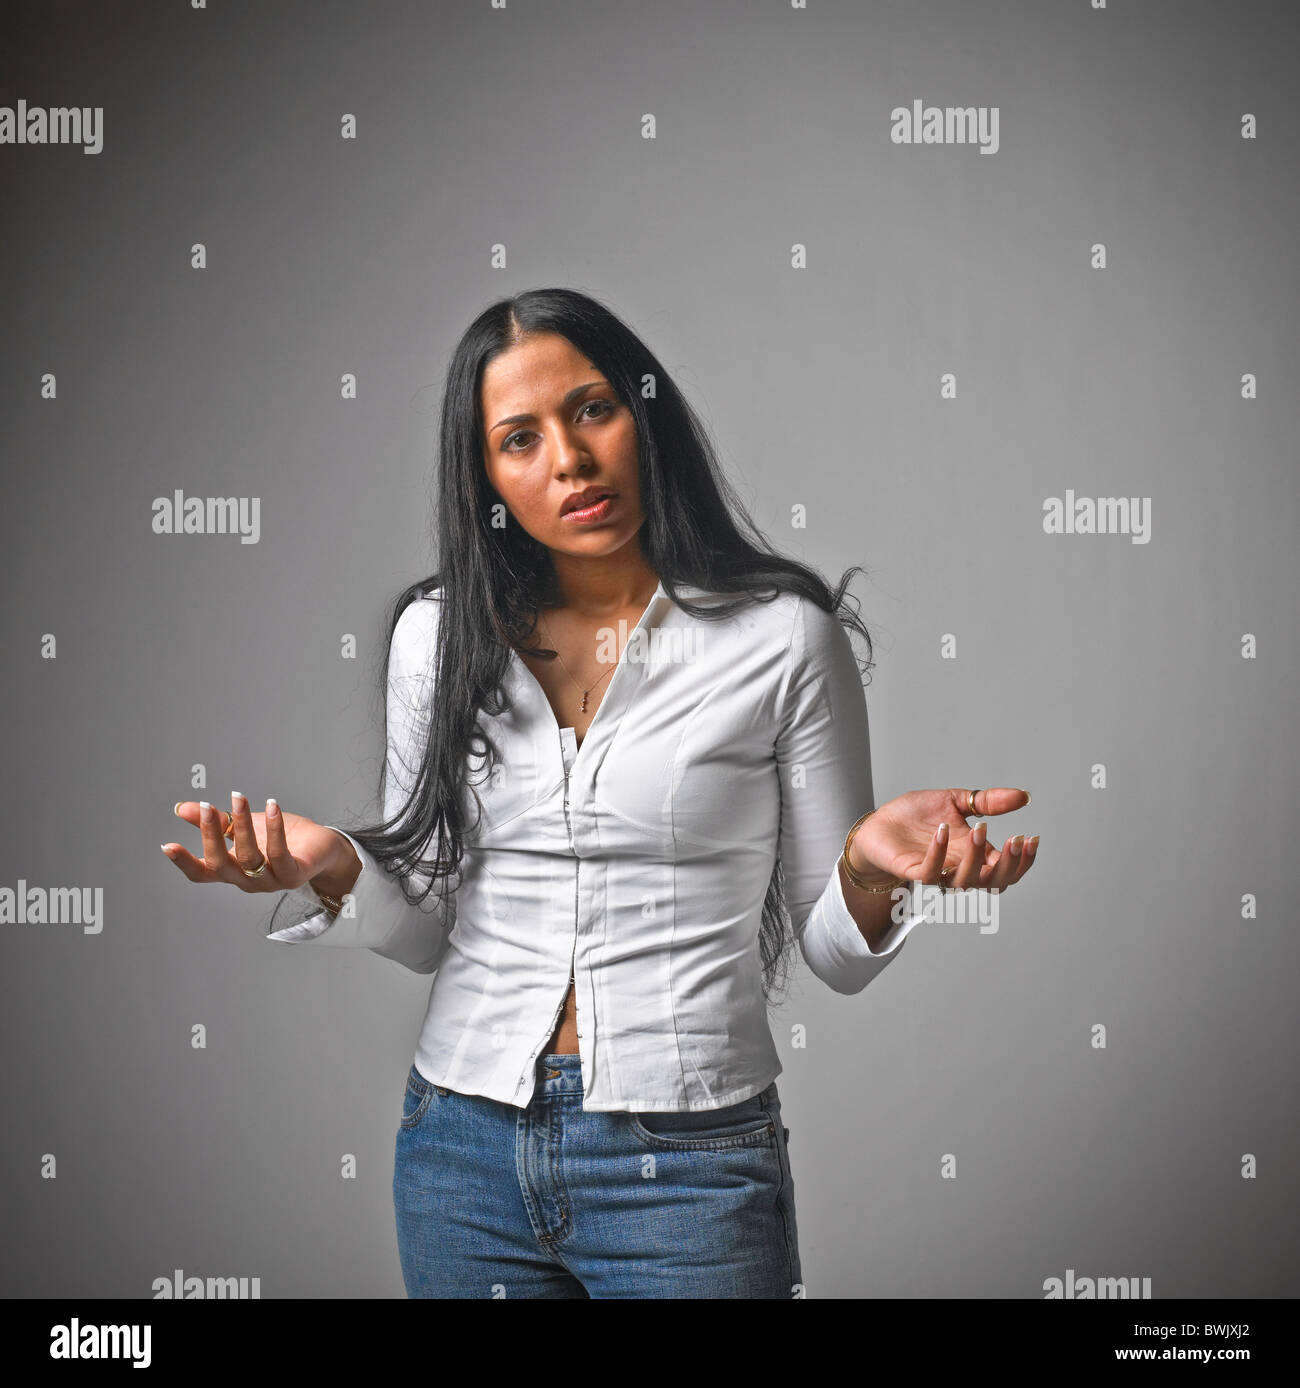 Young Hispanic woman female casual clothes, jeans, body language, Stock Photo